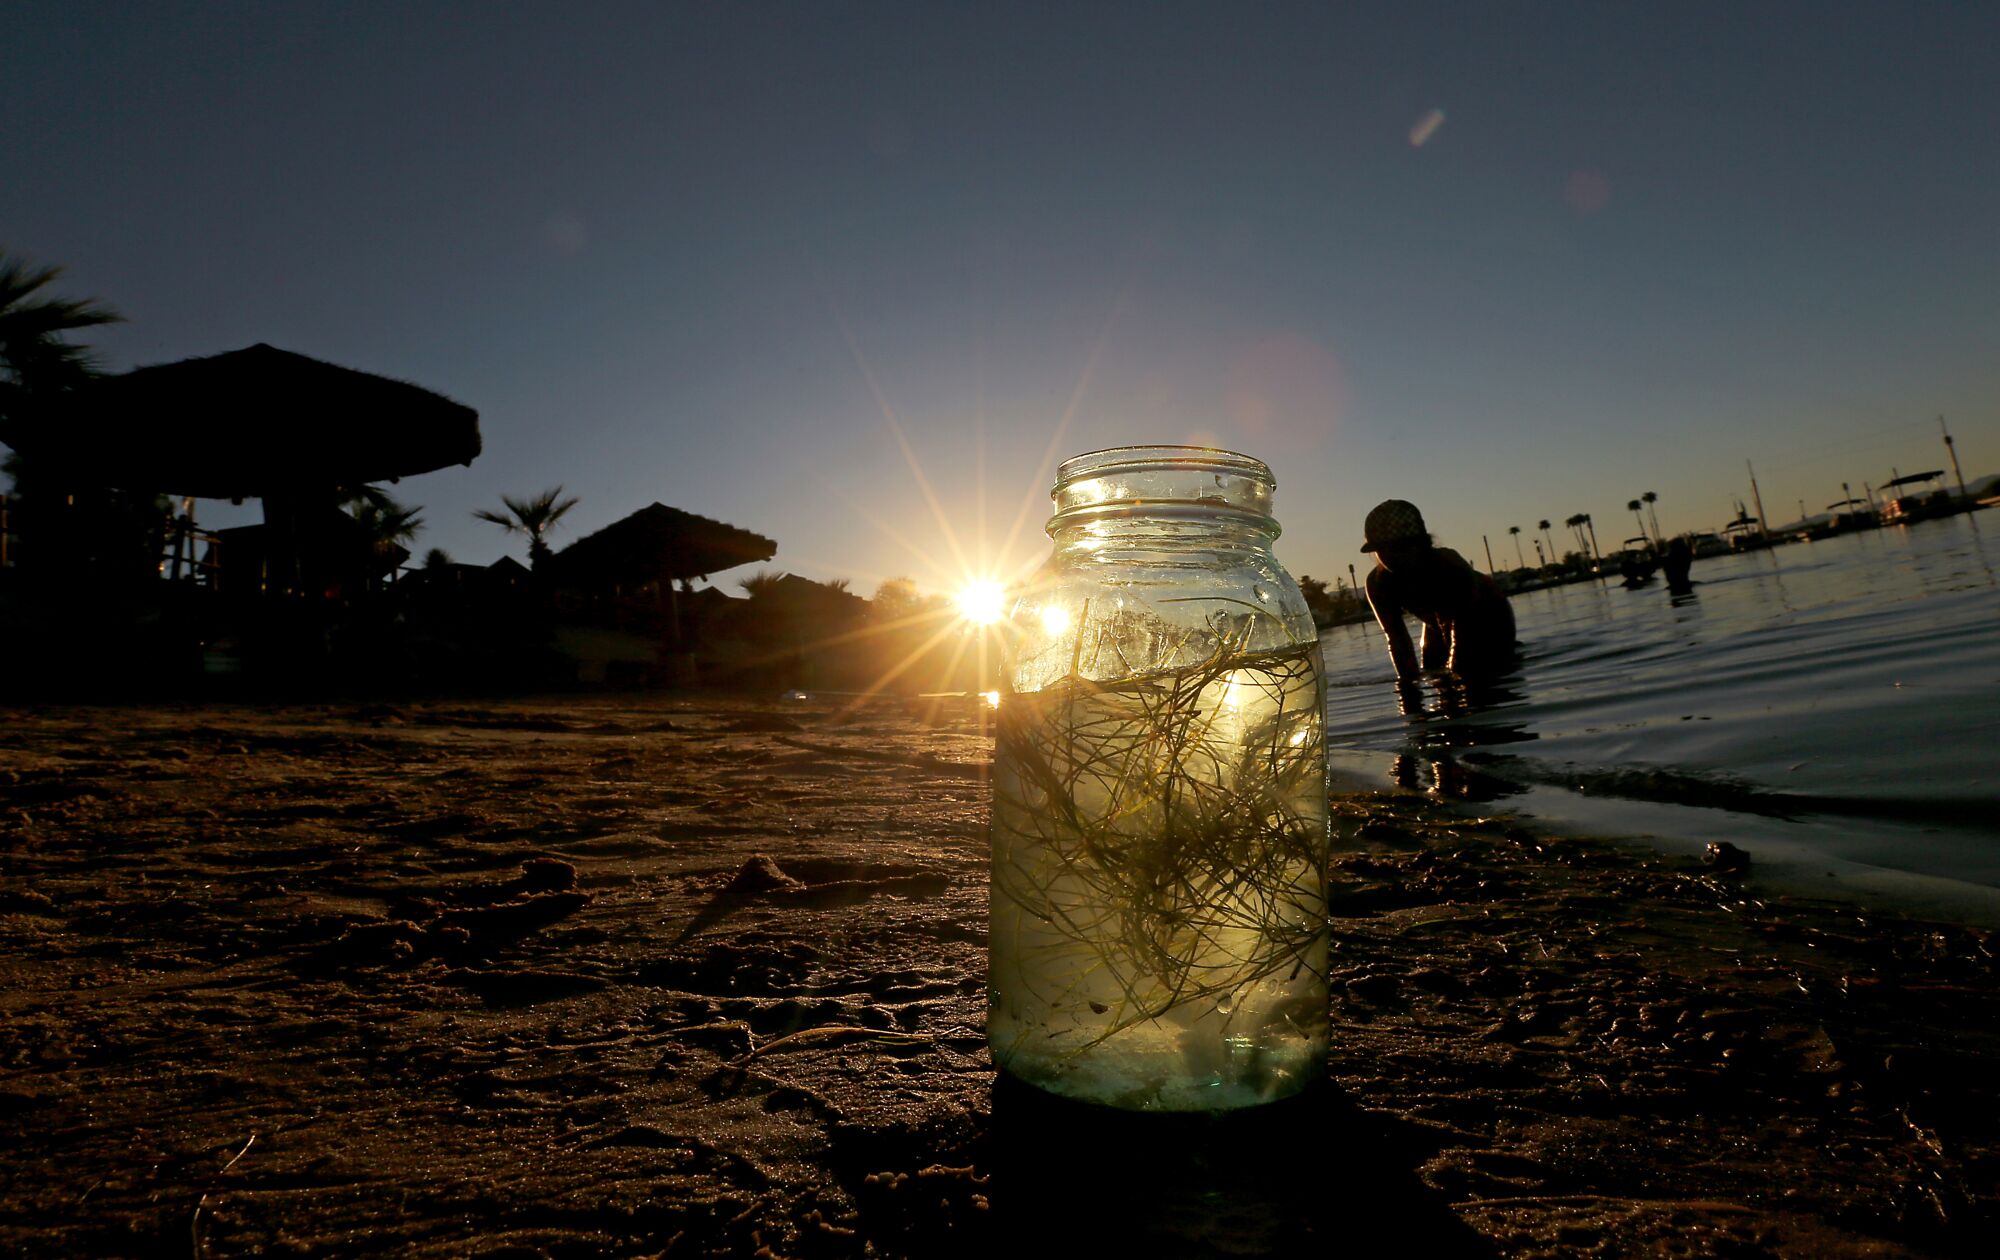 A child collects water, plants and small fish in a jar at Pirate Cove Resort and Marina near Needles